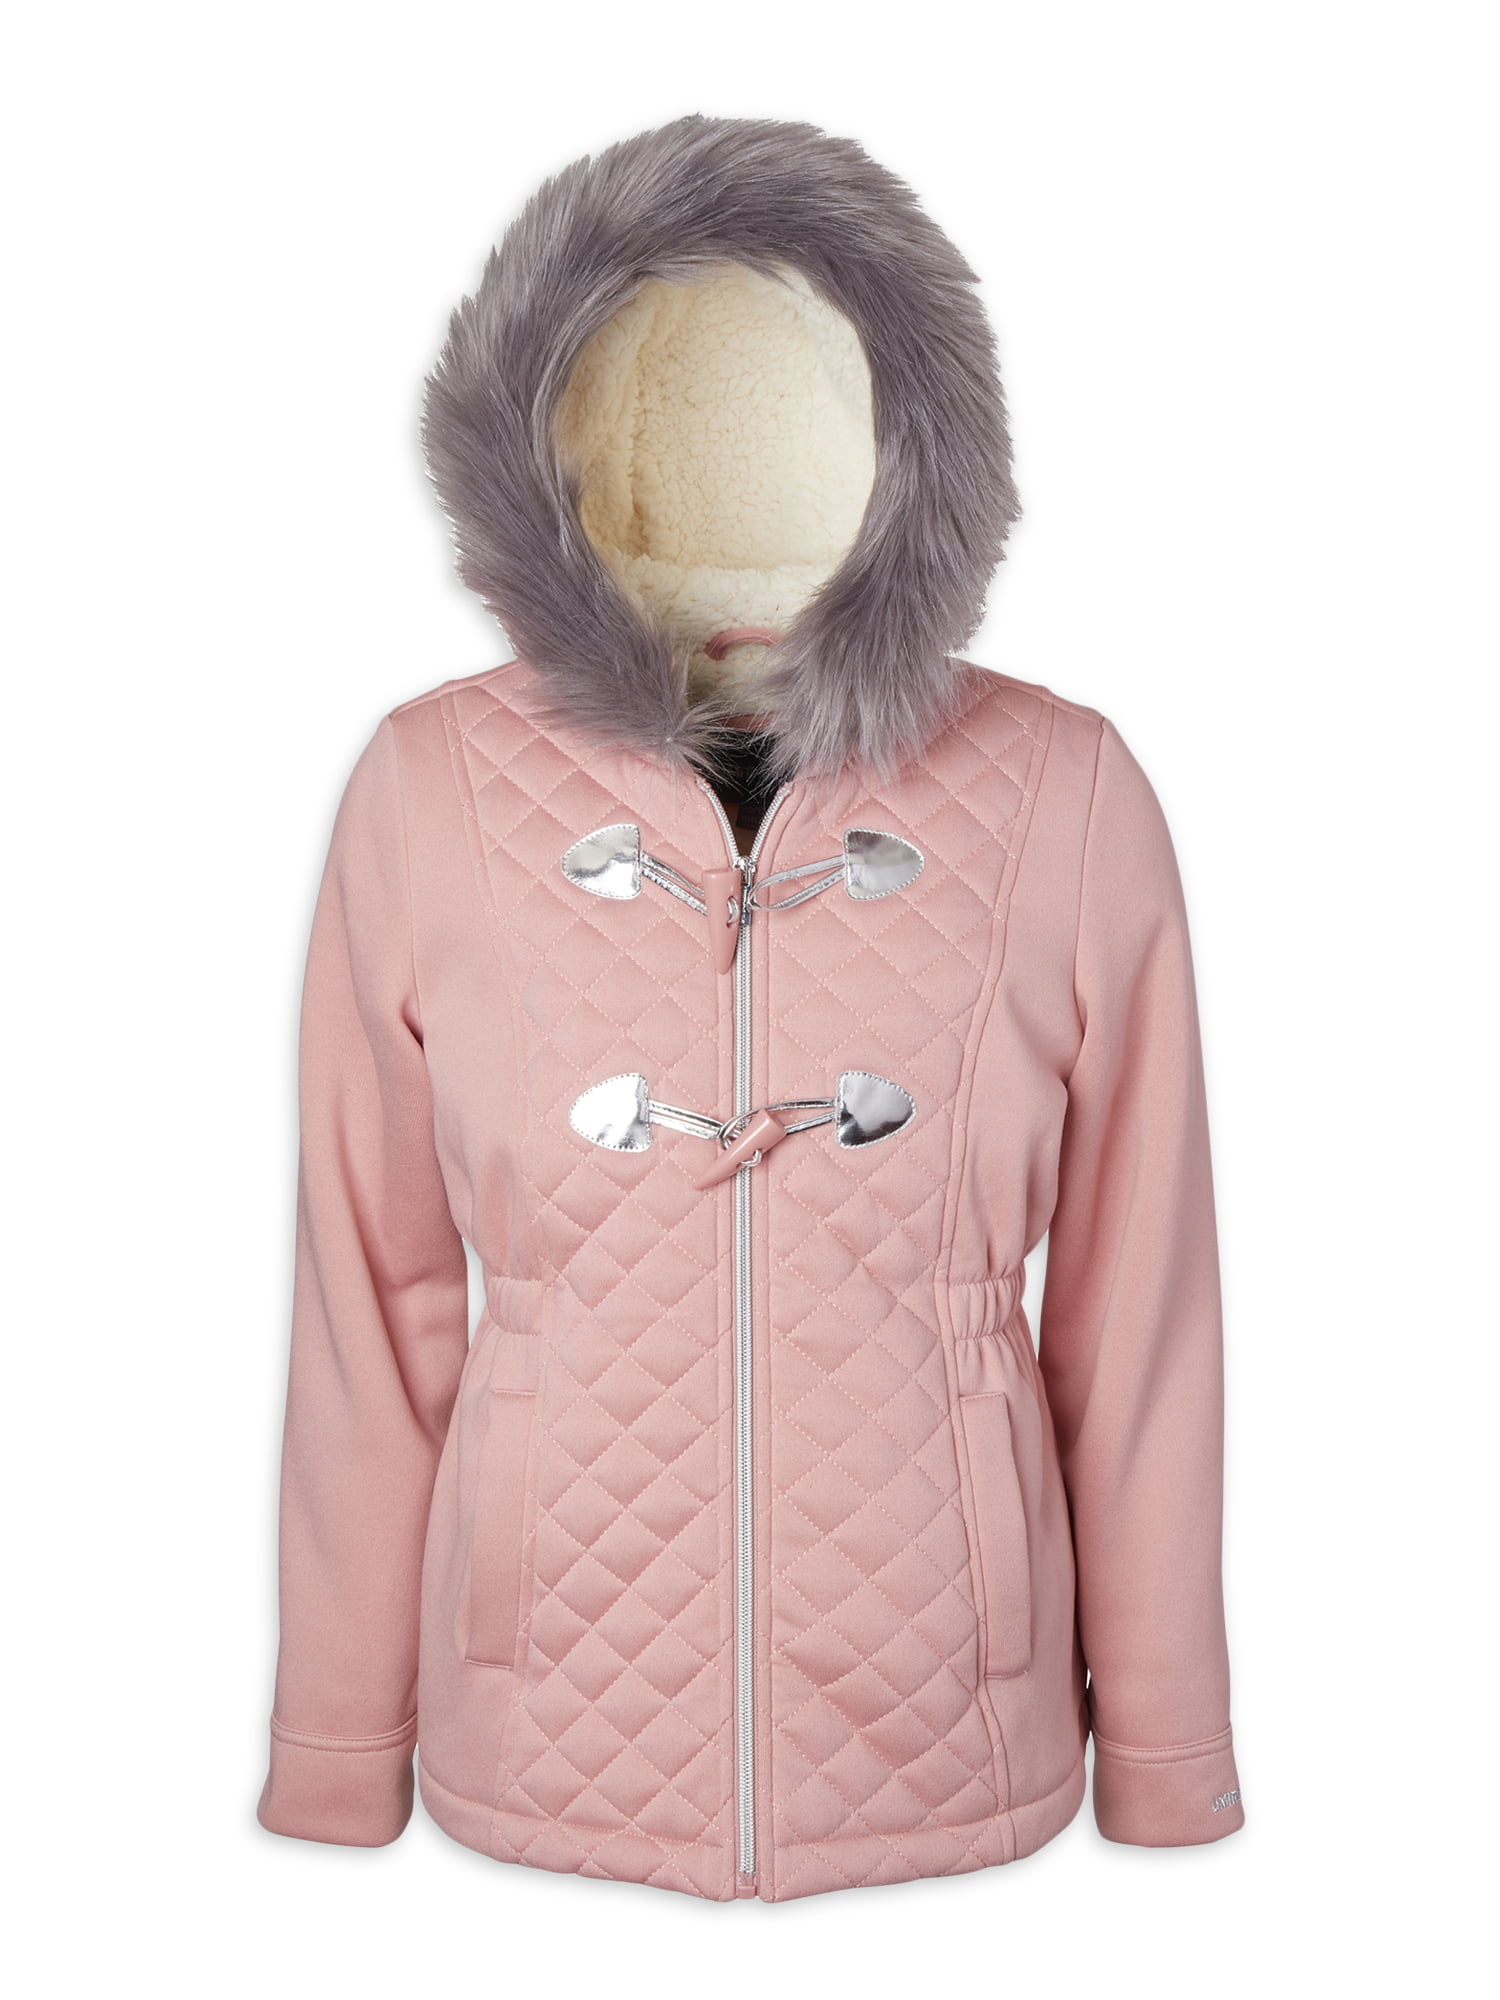 Limited Too girls Fleece Bomber With Warm Faux Fur Cheetah Lining 